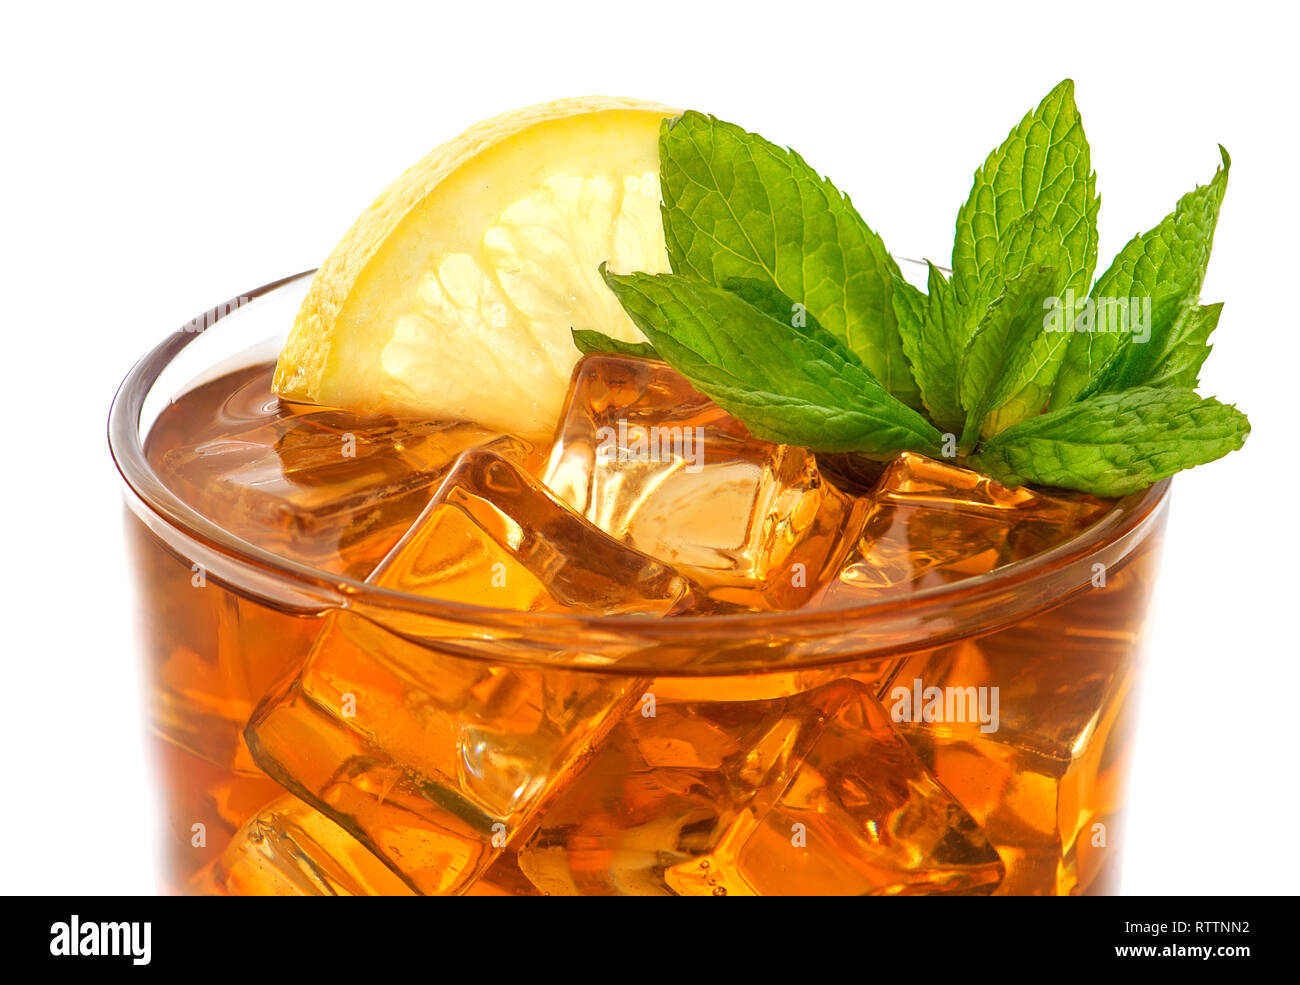 The glass of ice tea garnished with lemon and mint, isolated on white background. Stock Photo